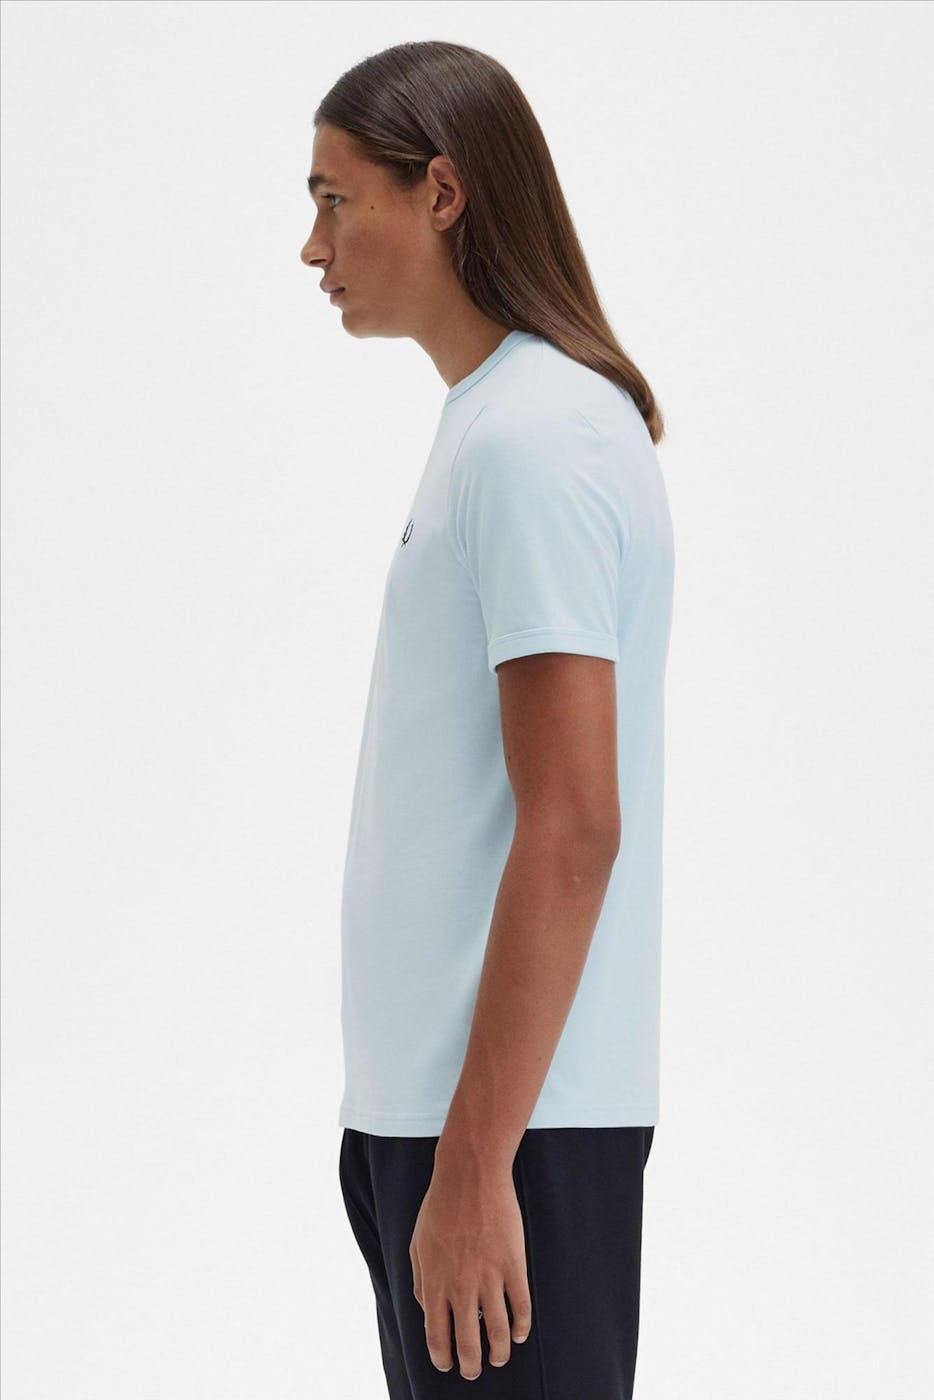 Fred Perry - Lichtblauwe Ringer T-shirt